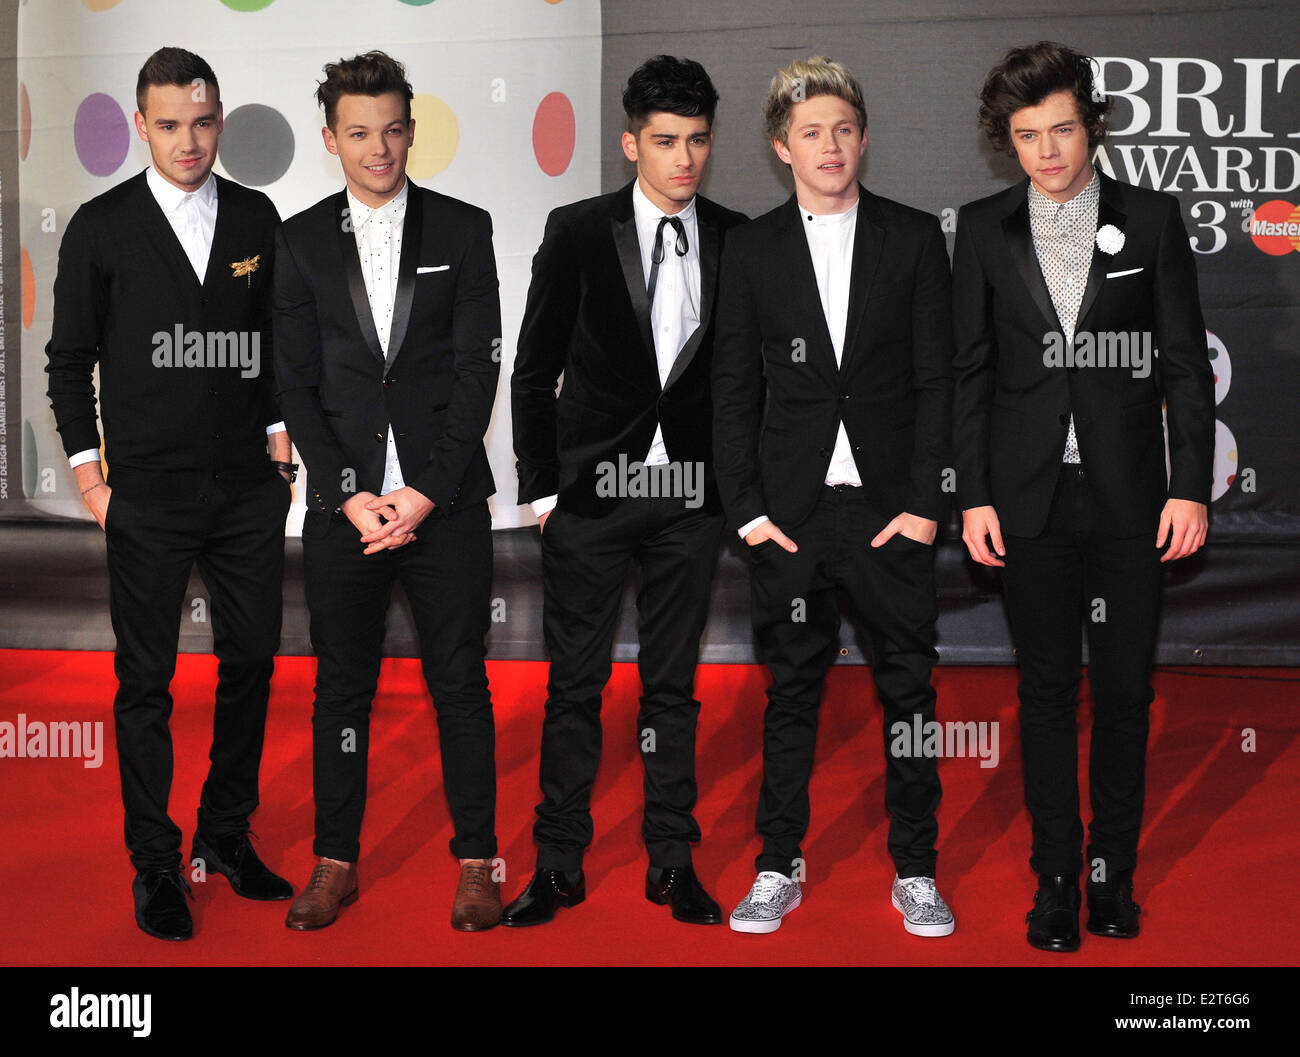 The 2013 Brit Awards (Brits) held at the O2 arena - Arrivals Featuring:  Liam Payne,Louis Tomlinson,Zayn Malik,Niall Horan,Harry Styles,One  Direction Where: London, United Kingdom When: 20 Feb 2013 Stock Photo -  Alamy